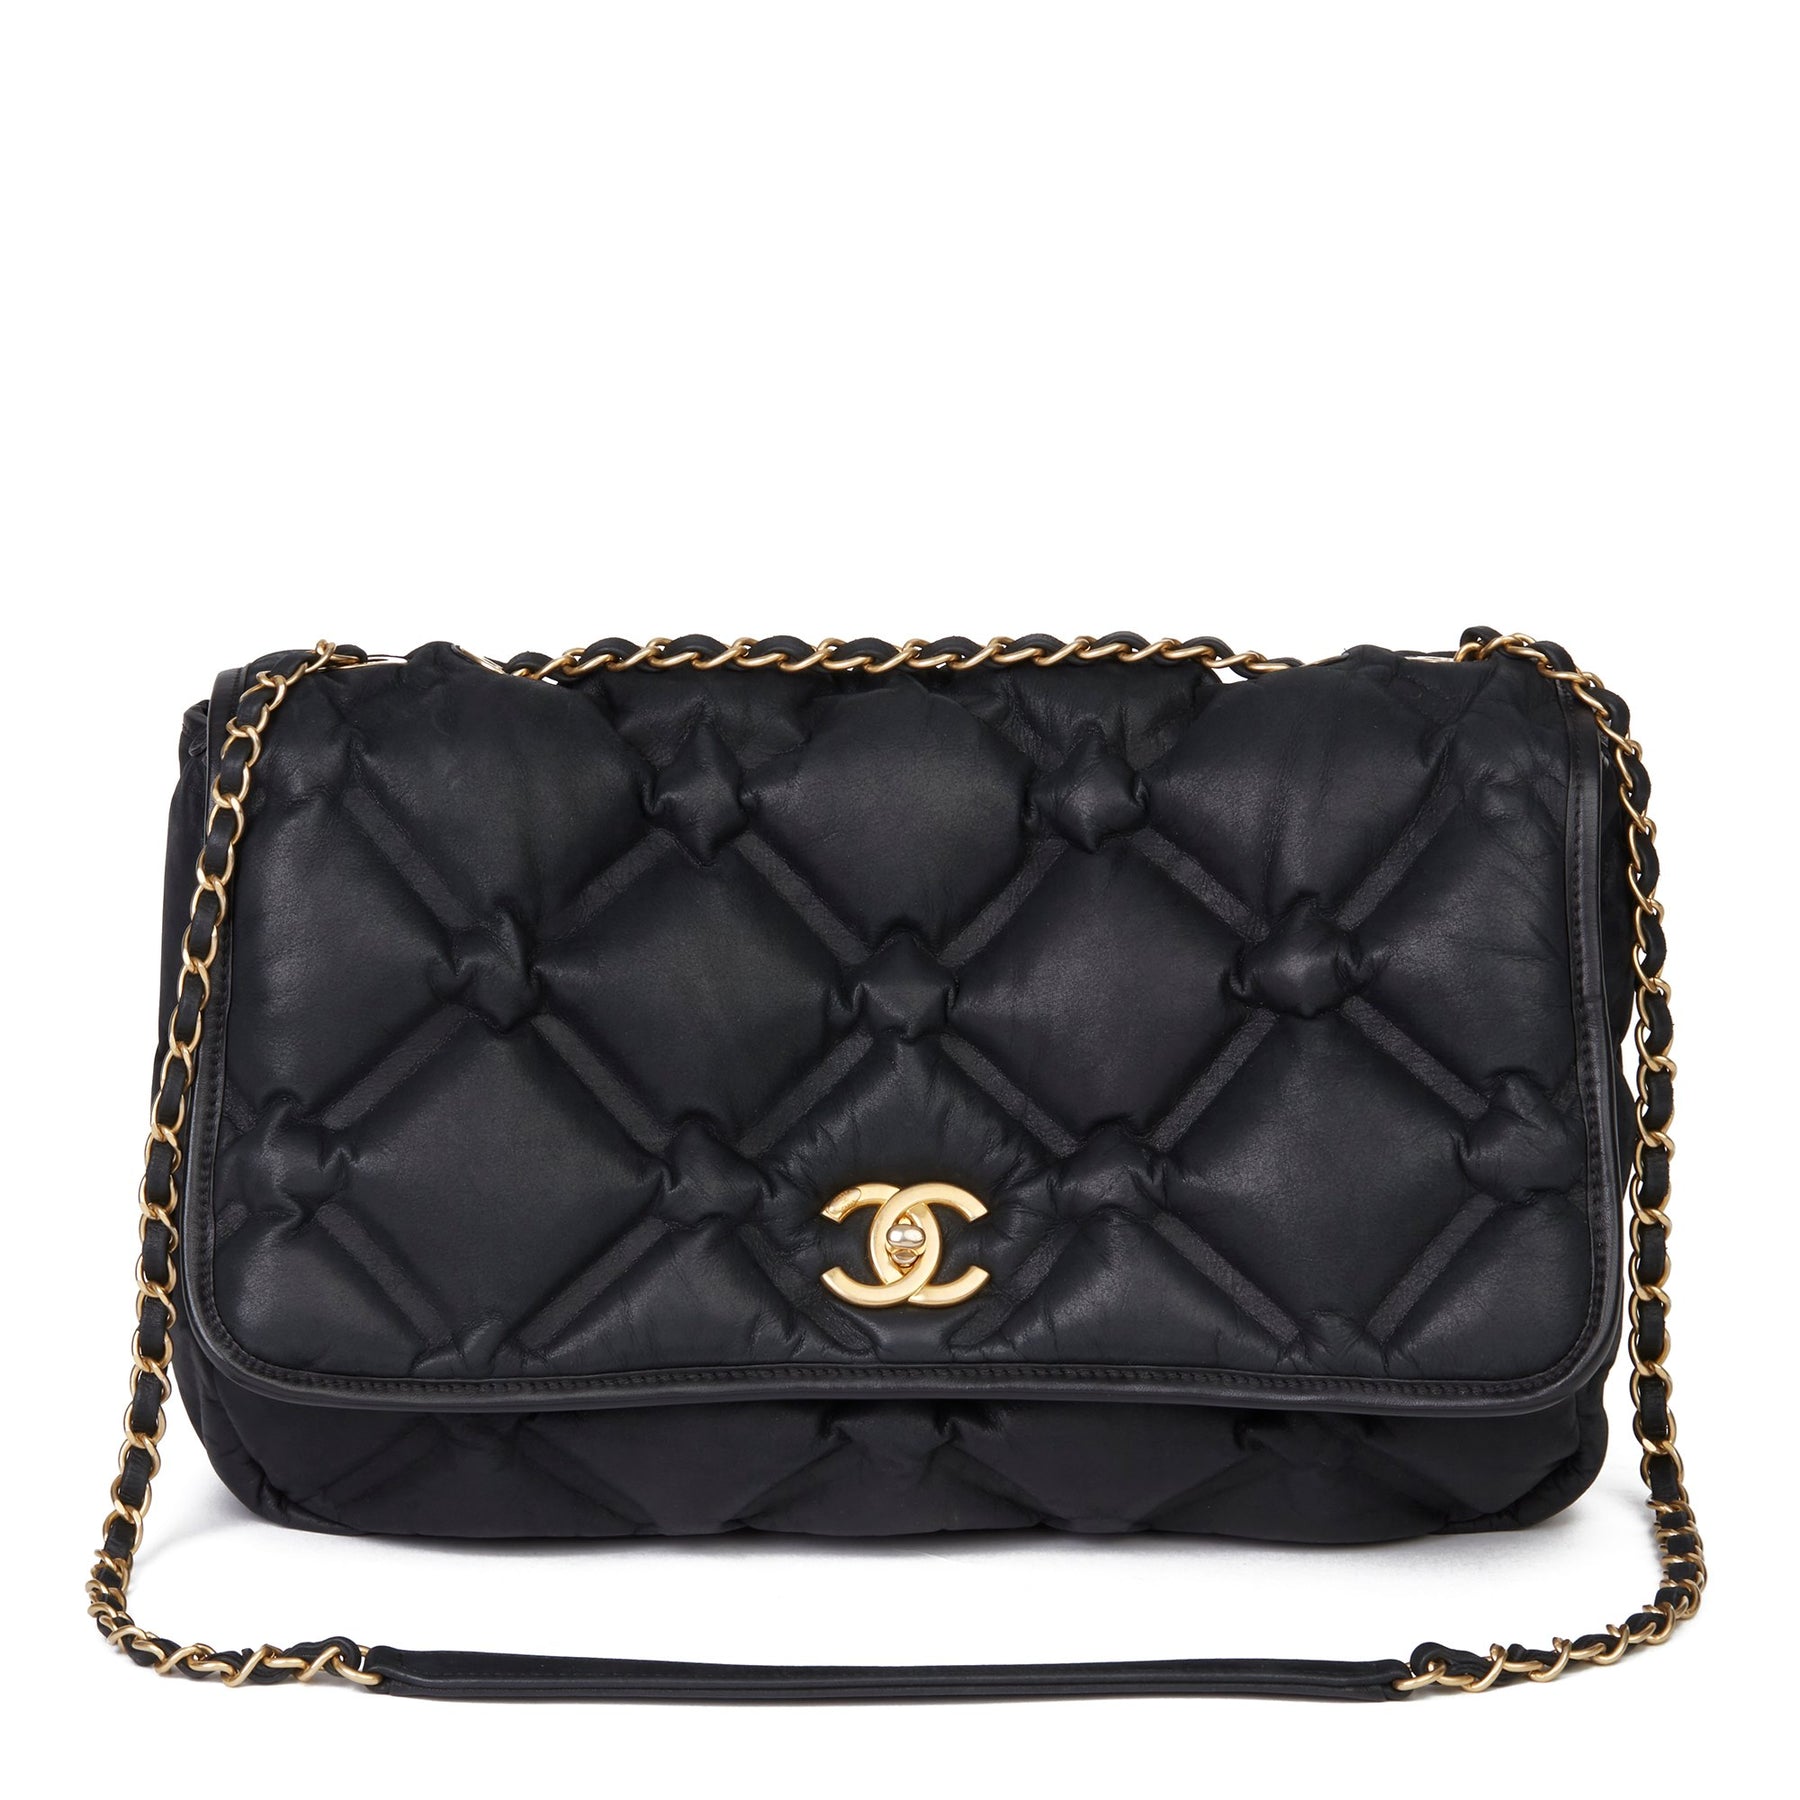 Chanel Chesterfield Small Flap Bag - Shoulder Bags, Handbags